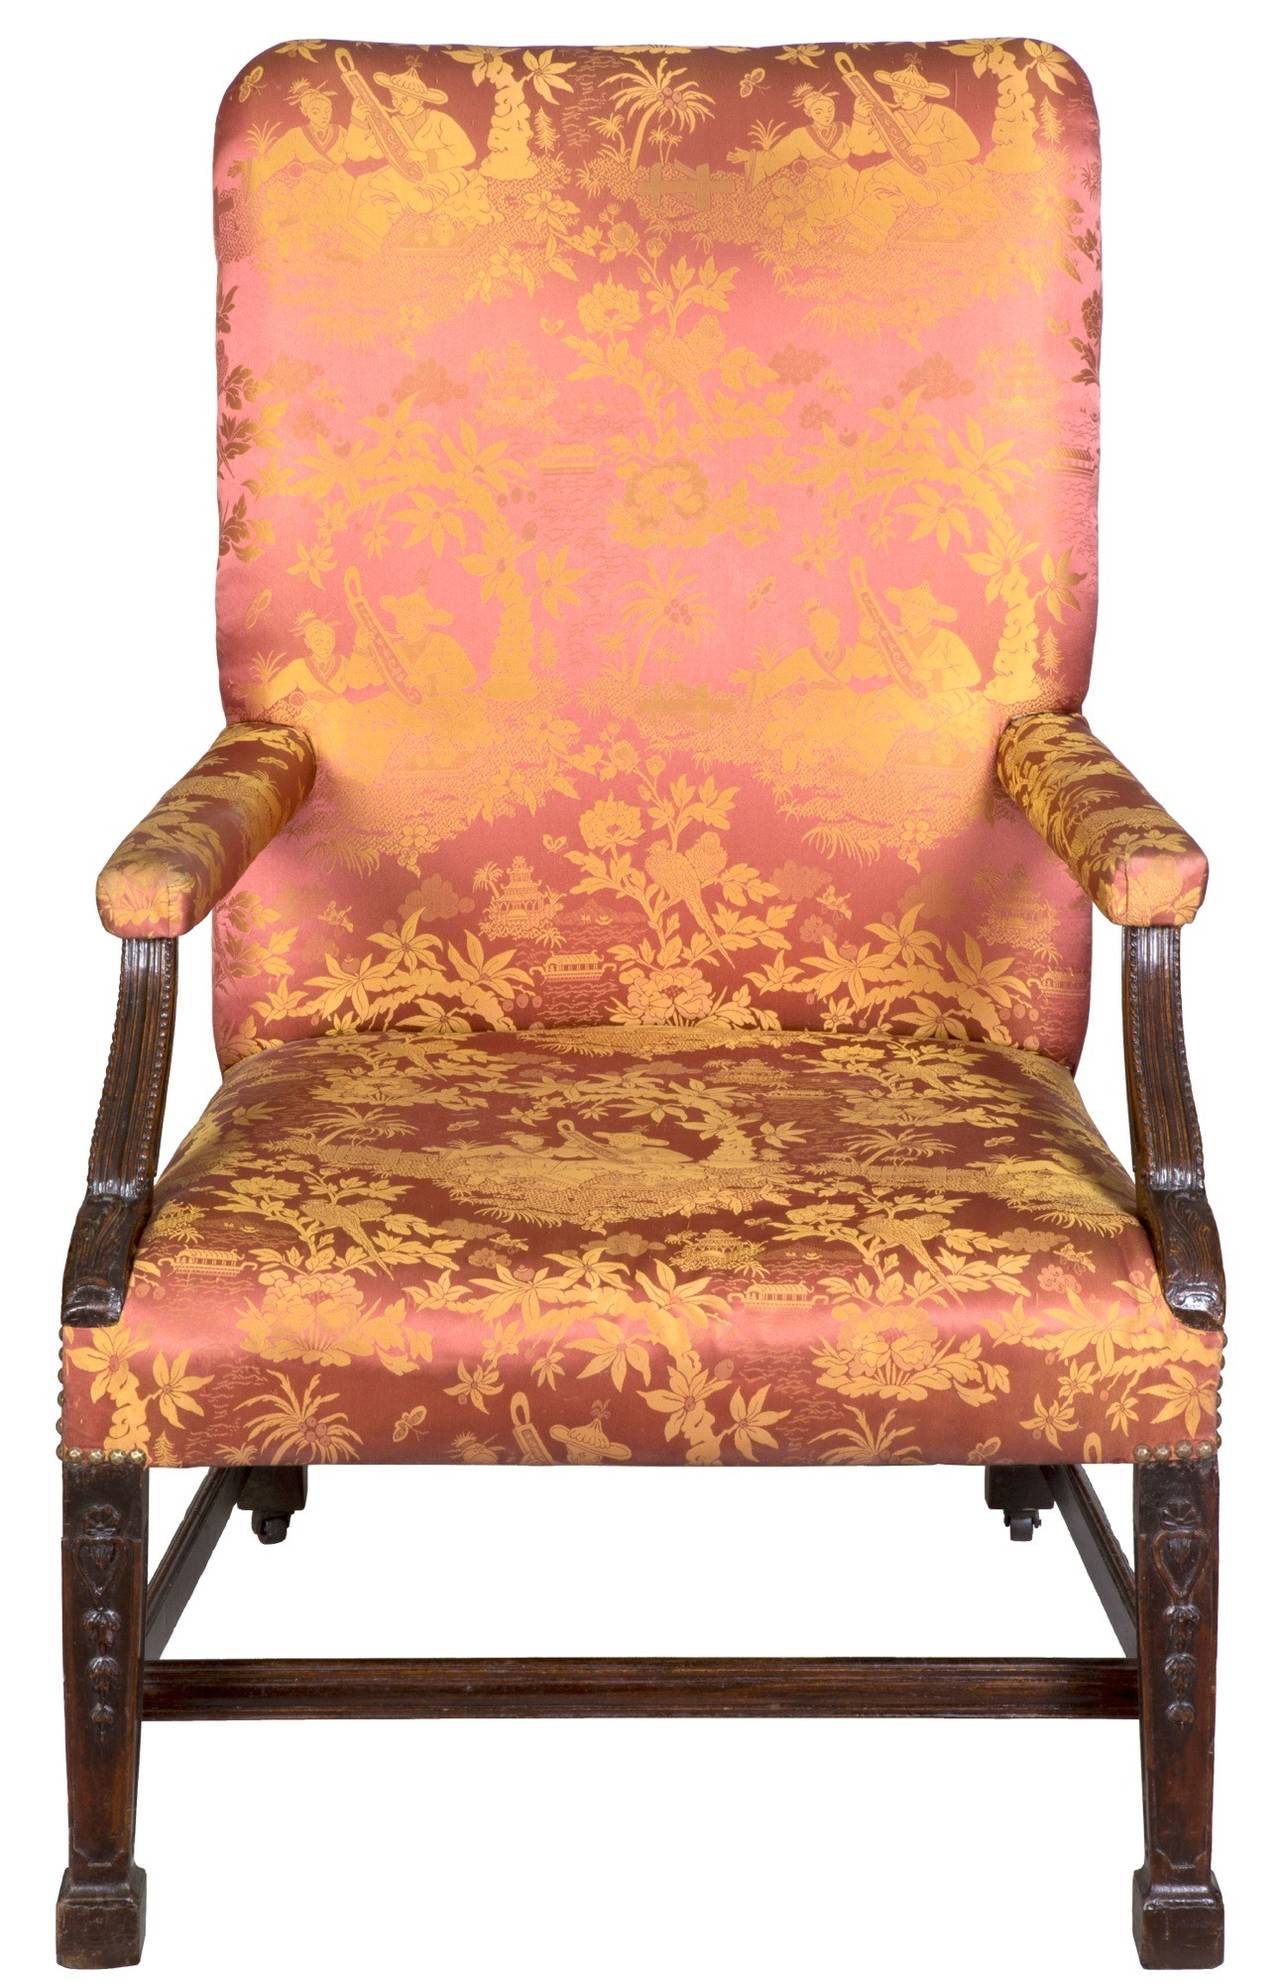 British Chippendale or George II Carved Mahogany Armchair with Marlboro Legs, circa 1780